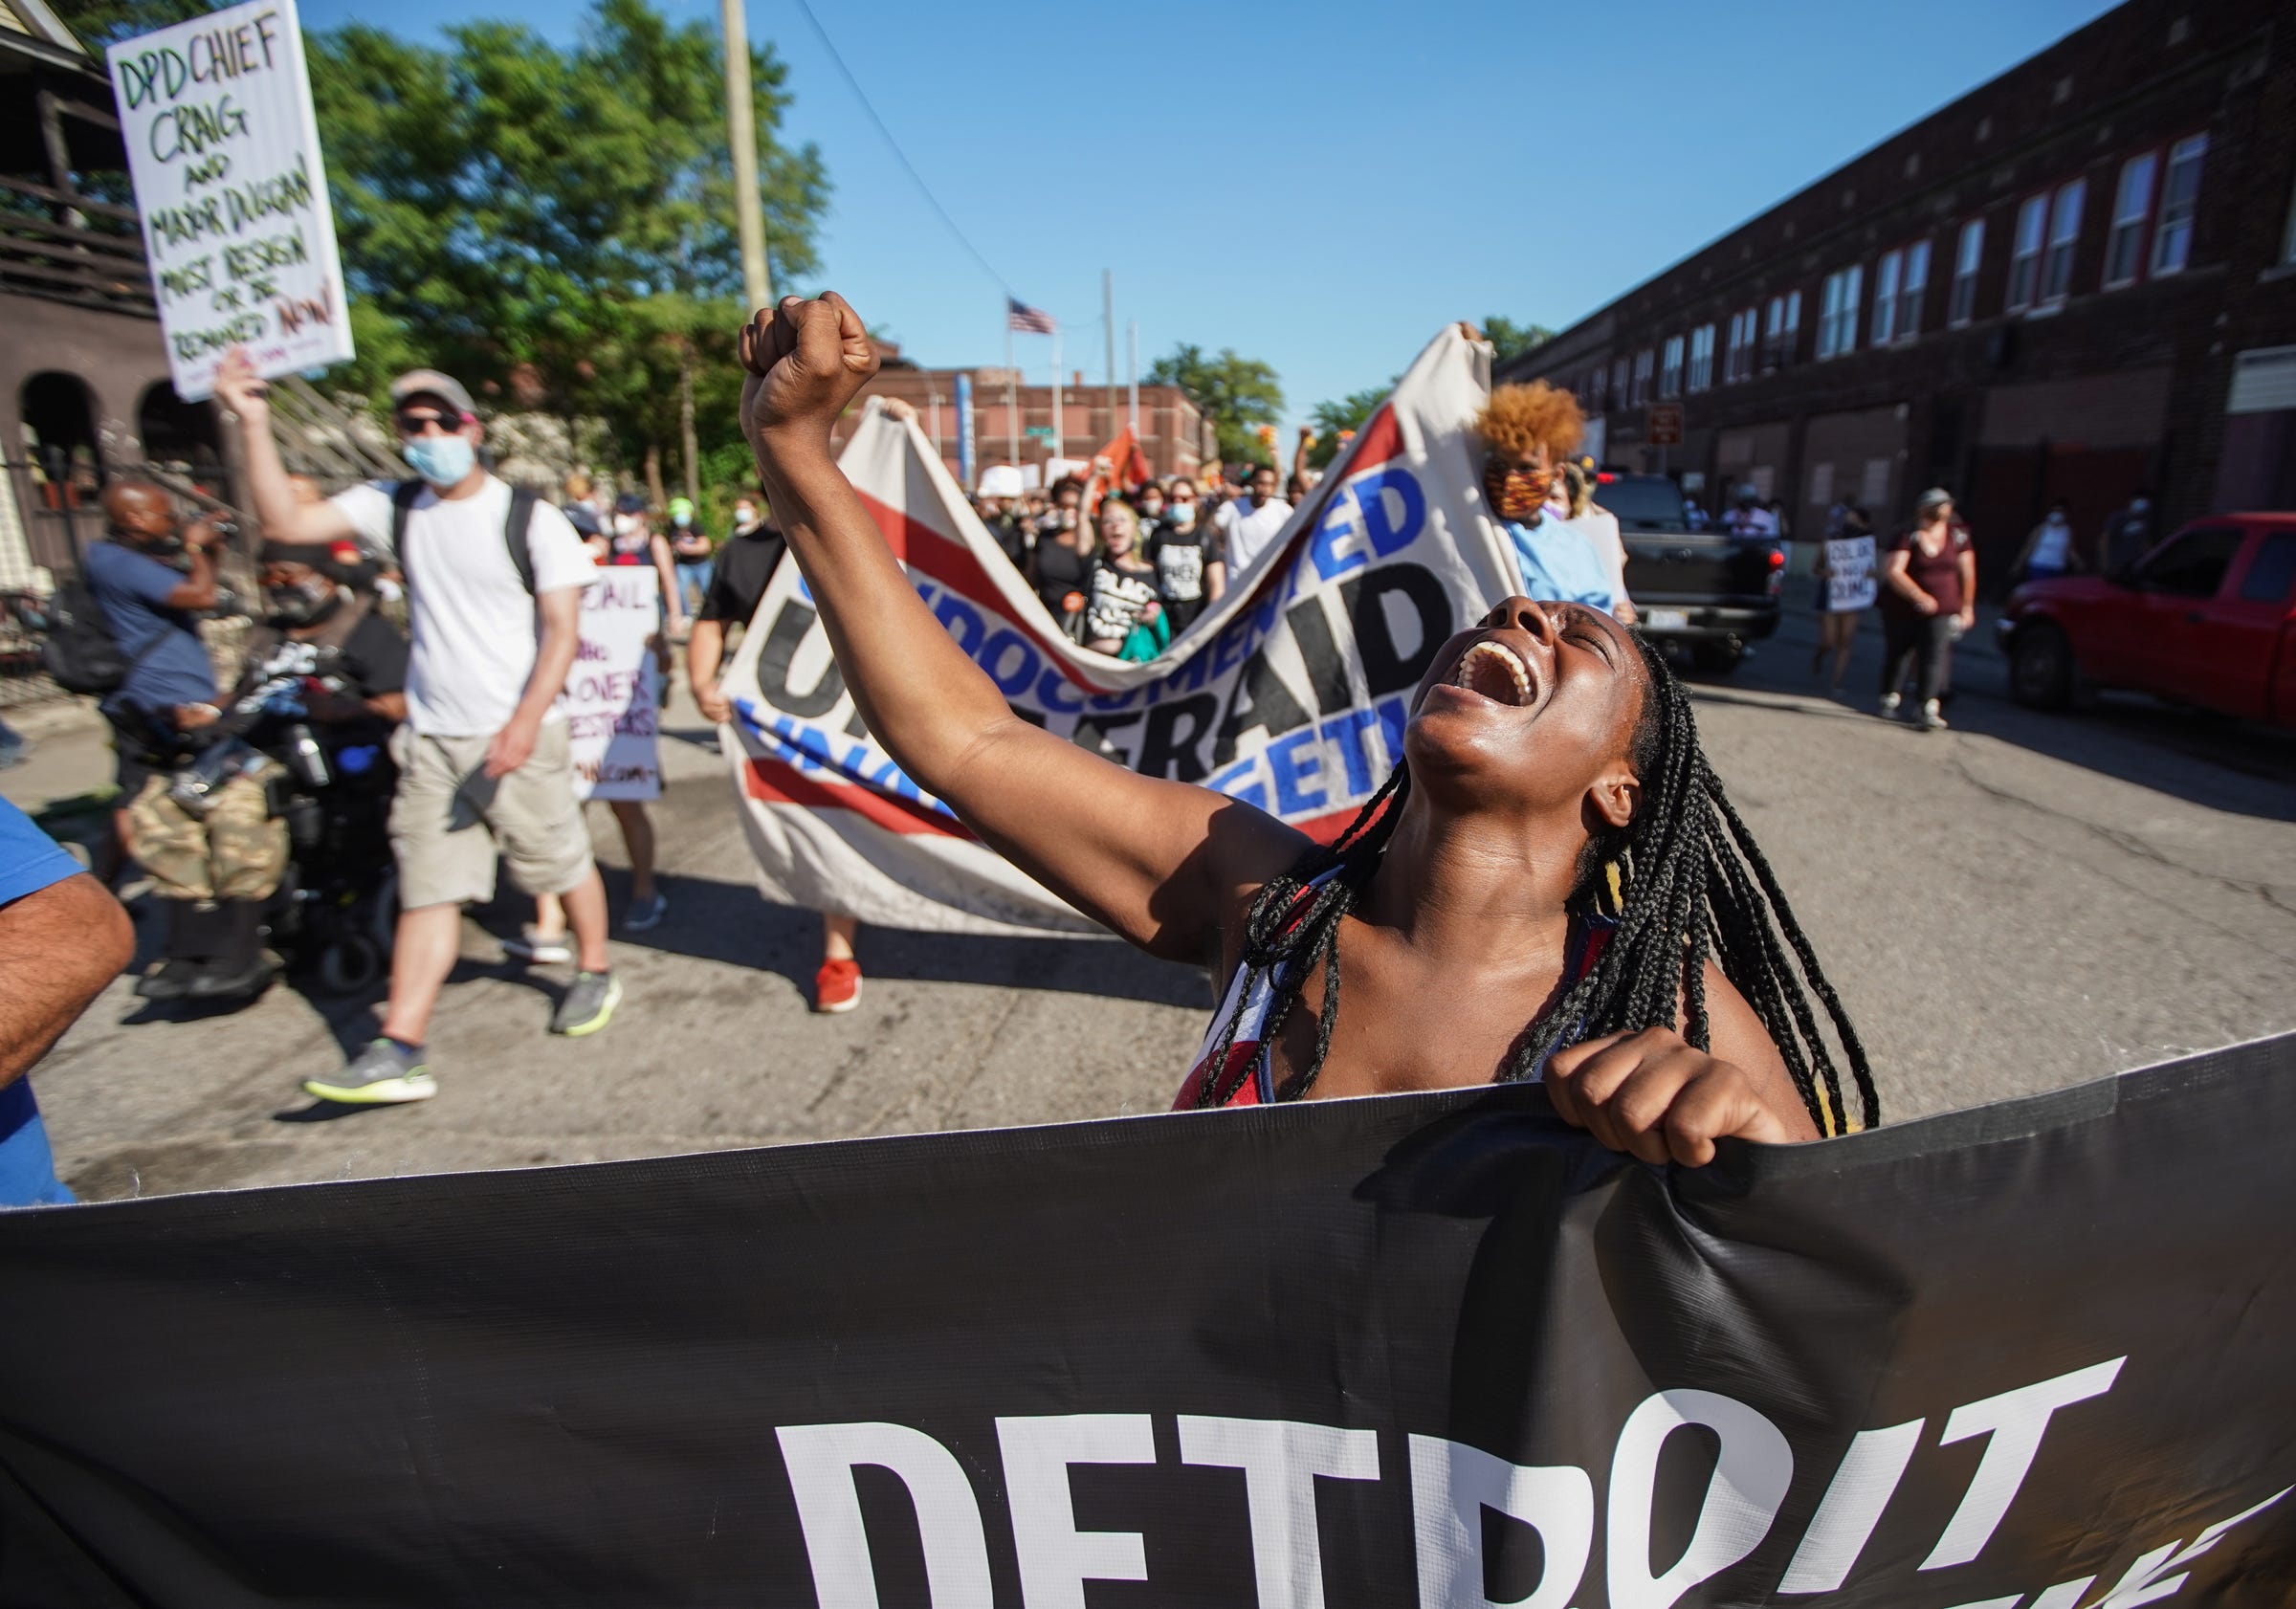 Shaqualla Johnson of Detroit shouts a chant while marching with other protesters in southwest Detroit neighborhood on Monday, June 29, 2020.